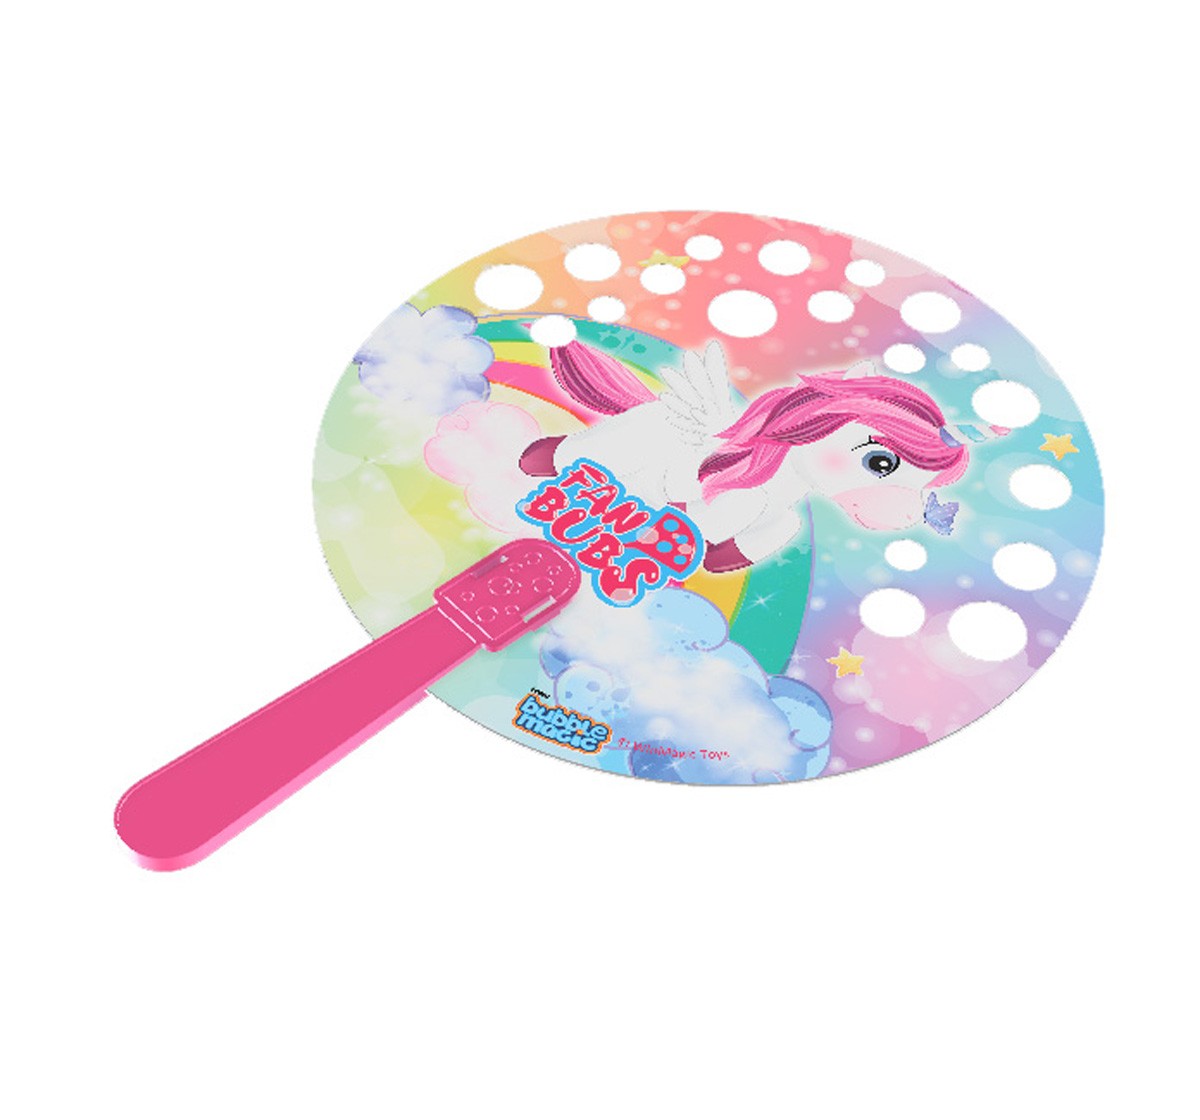 Bubble Magic Fan Bubs Unicorn, for The Kids 3 Years and Above